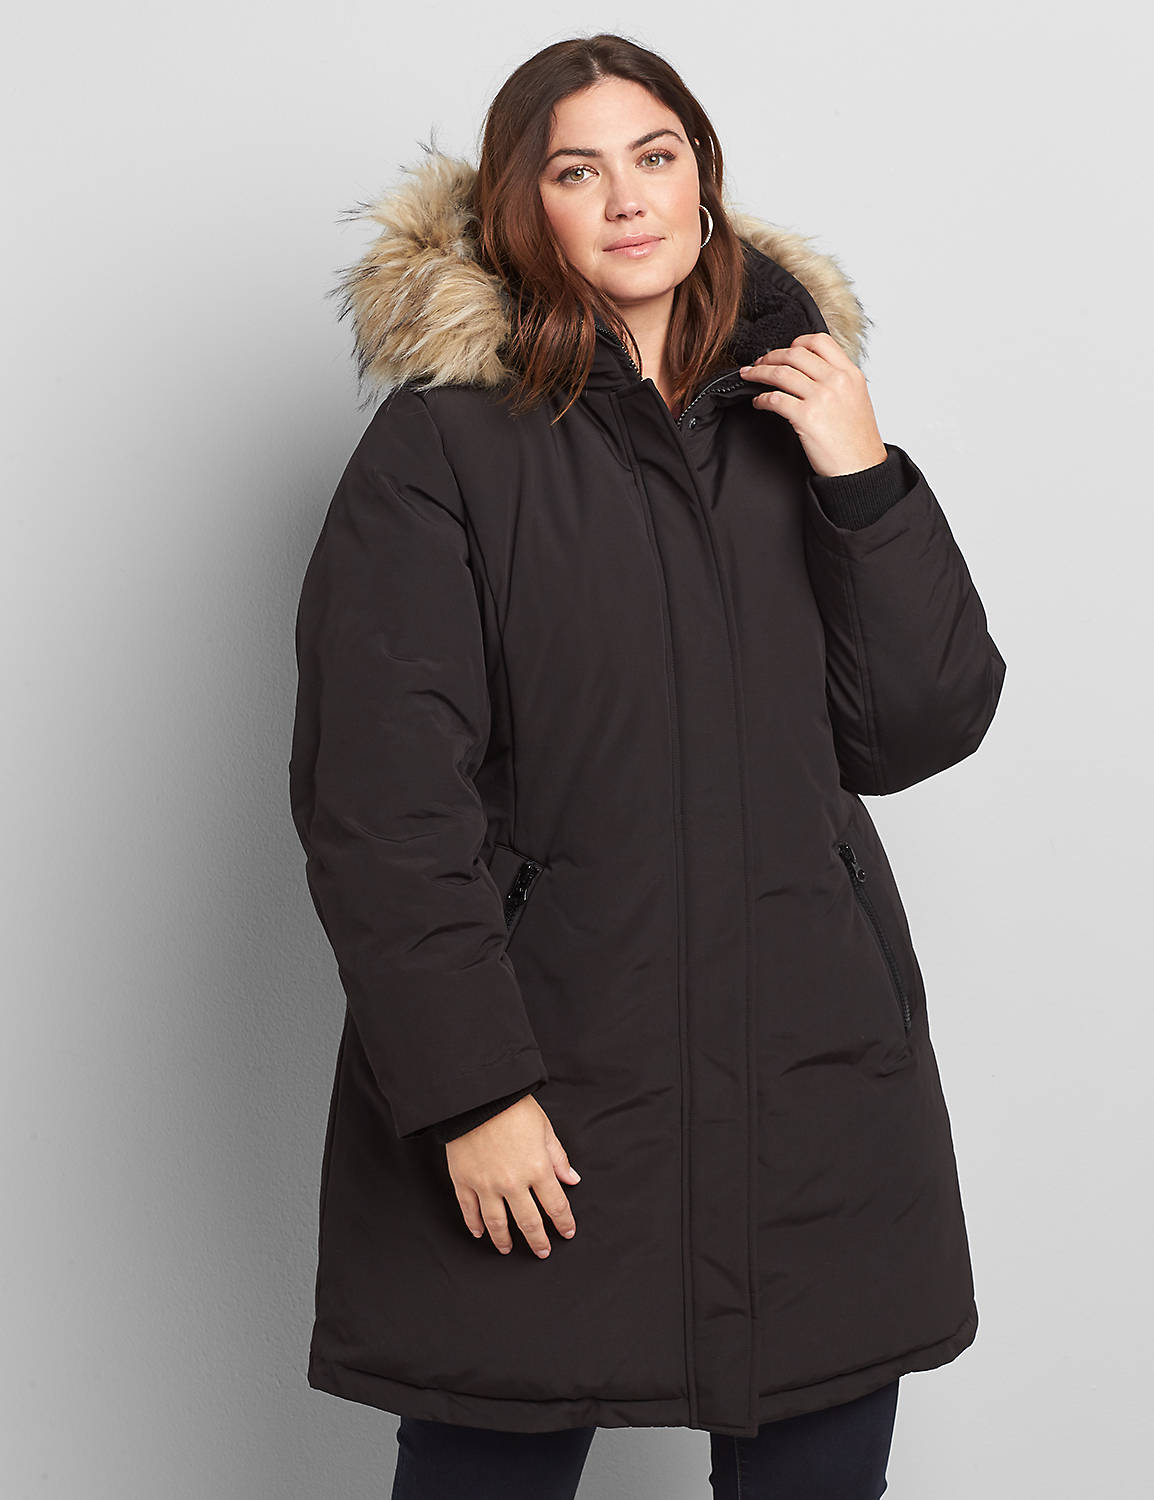 Rothschild Nylon Parka with Fur Hood 1114924:Pitch Black LB 1000322:10/12 Product Image 1